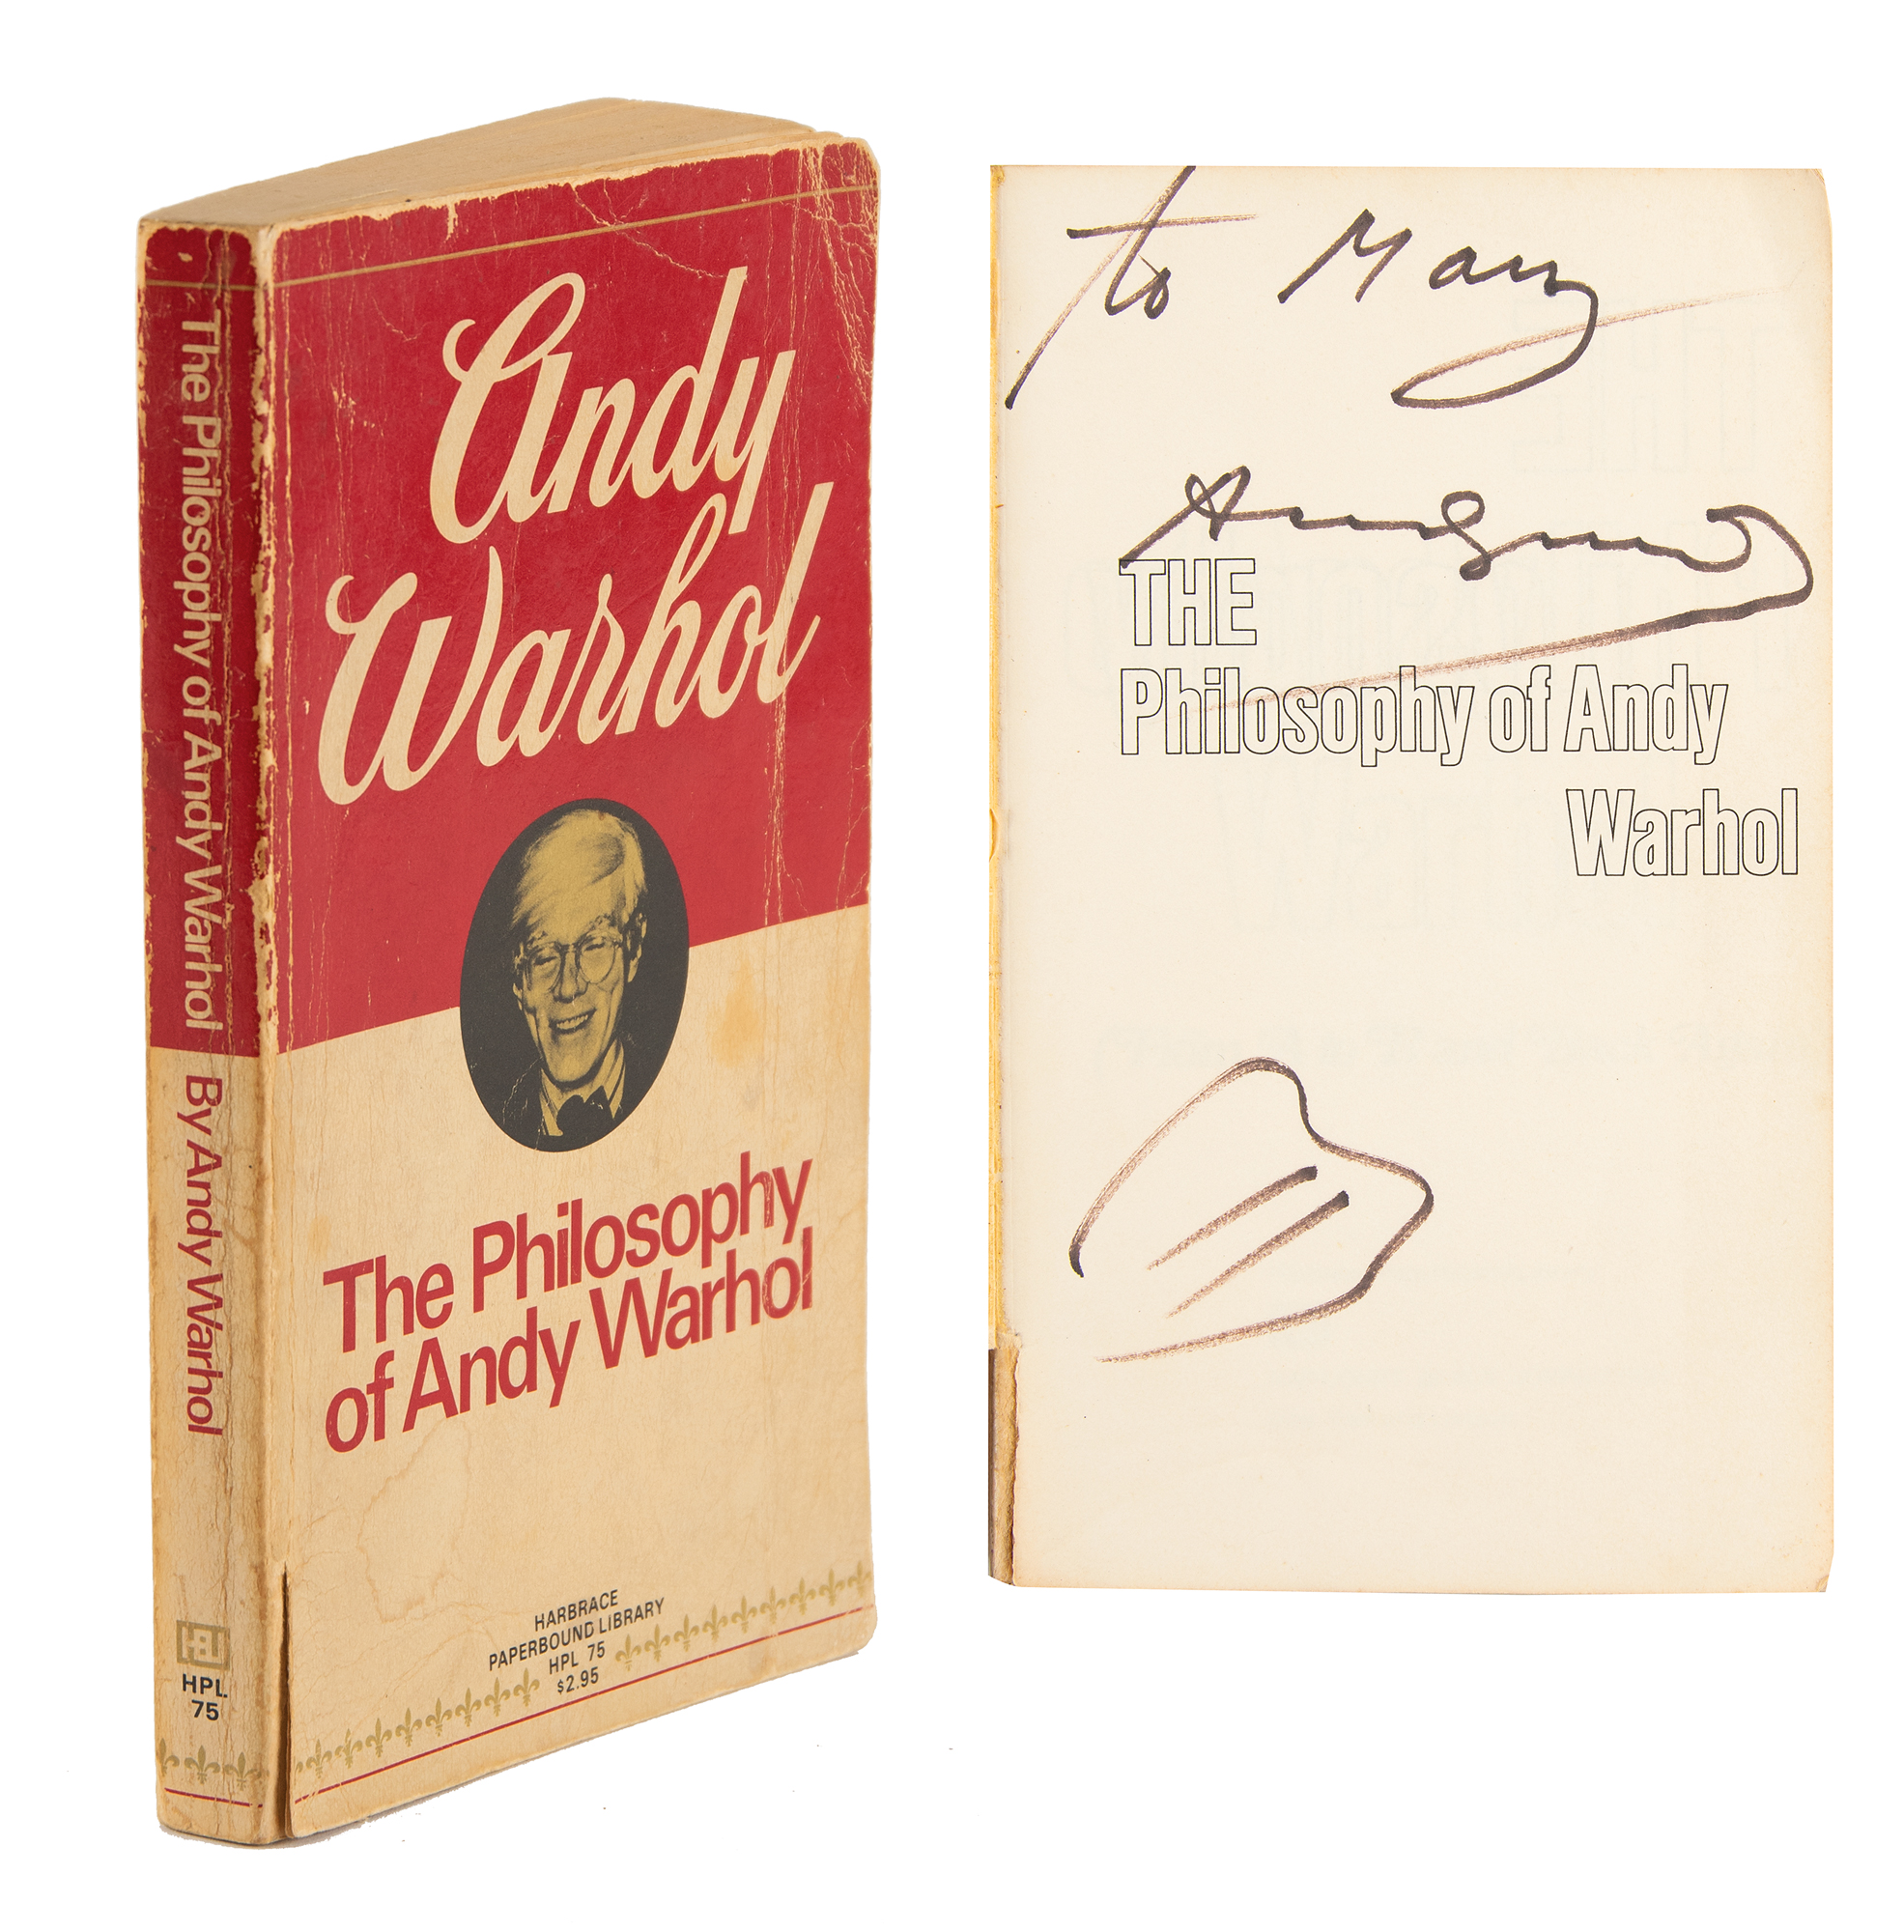 Lot #409 Andy Warhol Signed Book with Sketch